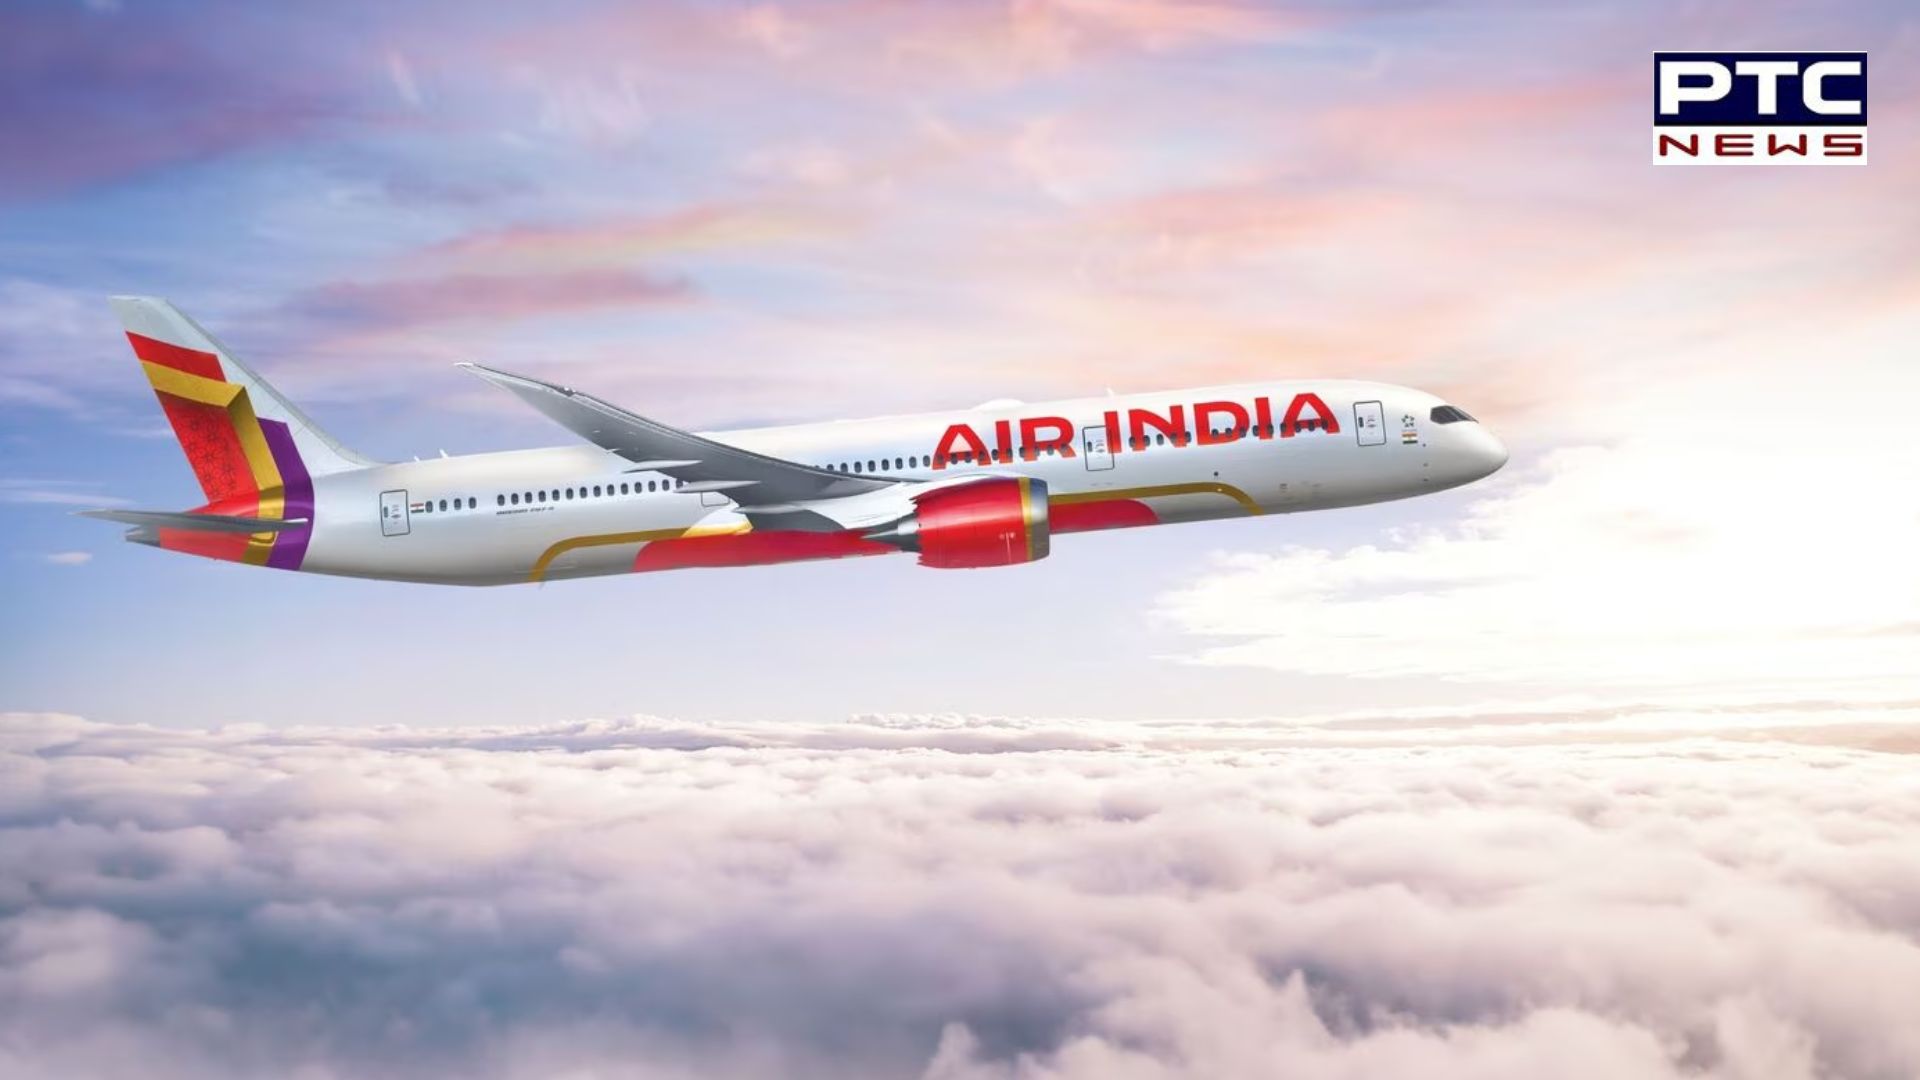 Mass layoffs: Air India lays off over 180 employees